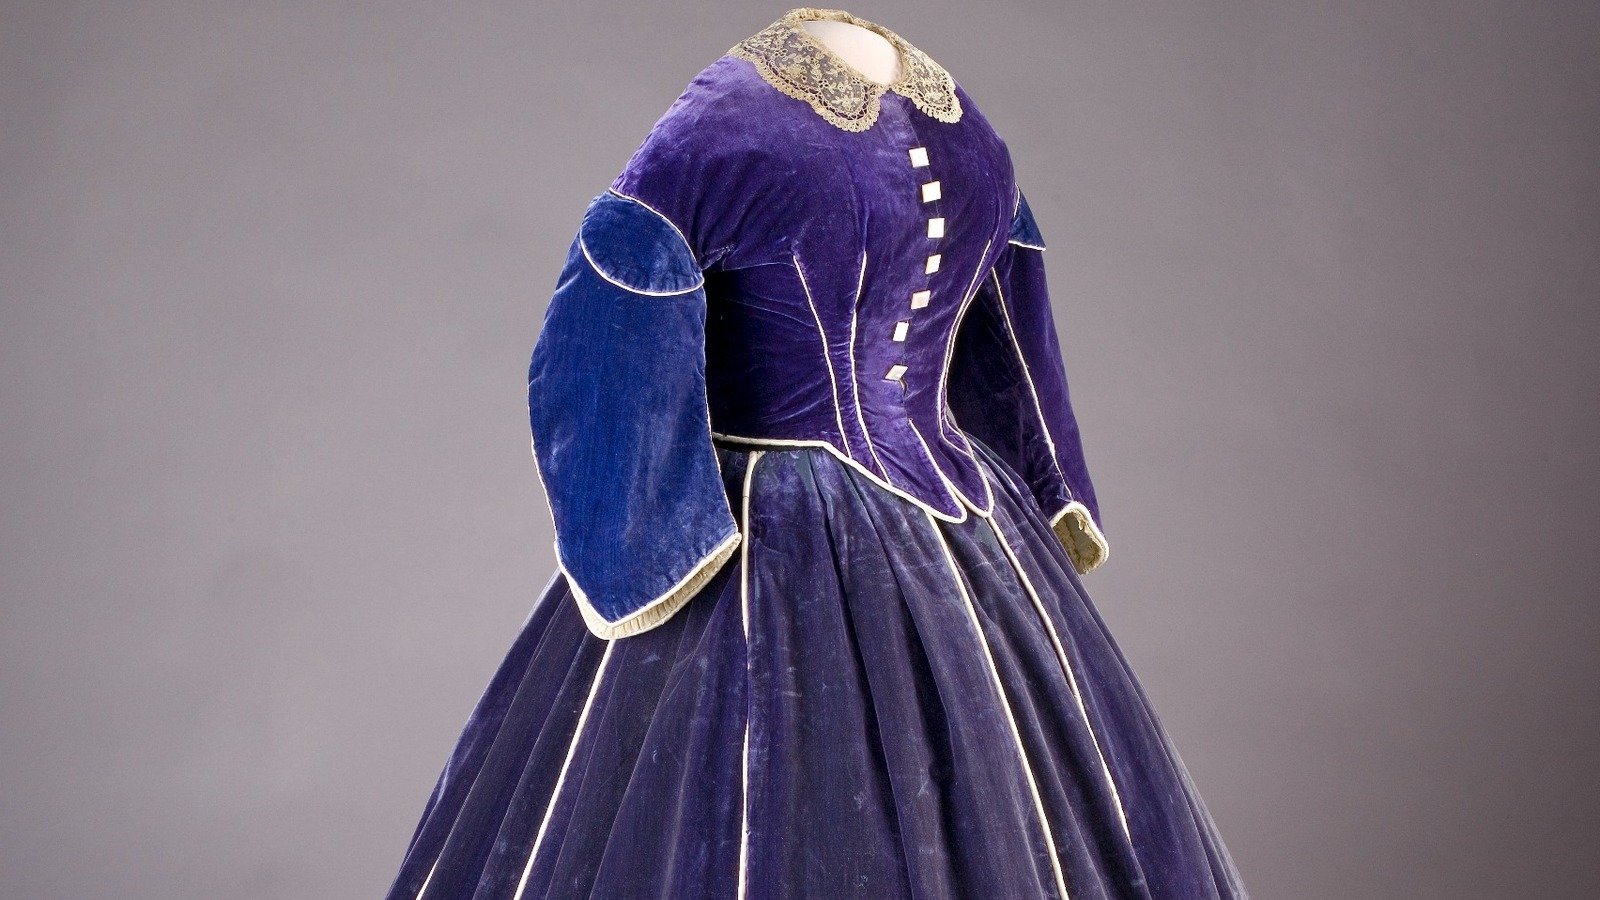 The History Behind Mary Todd Lincoln's Famous Purple Velvet Dress